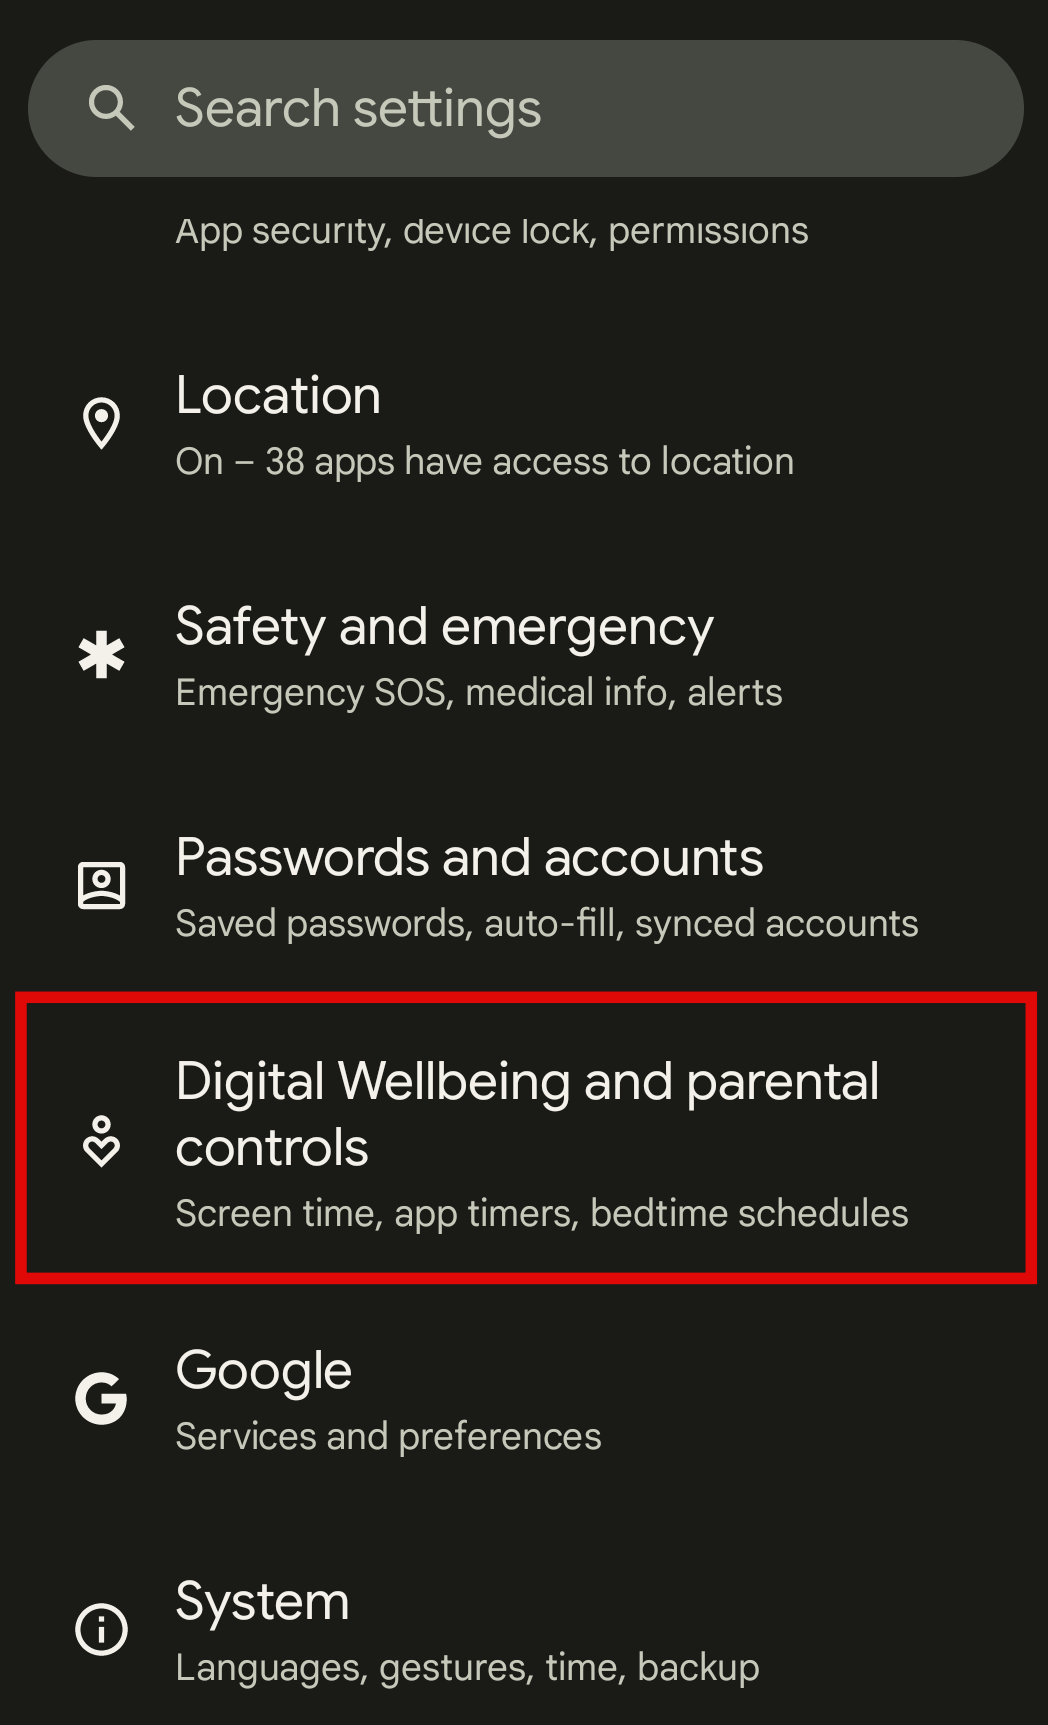 Digital Wellbeing and Parental Controls